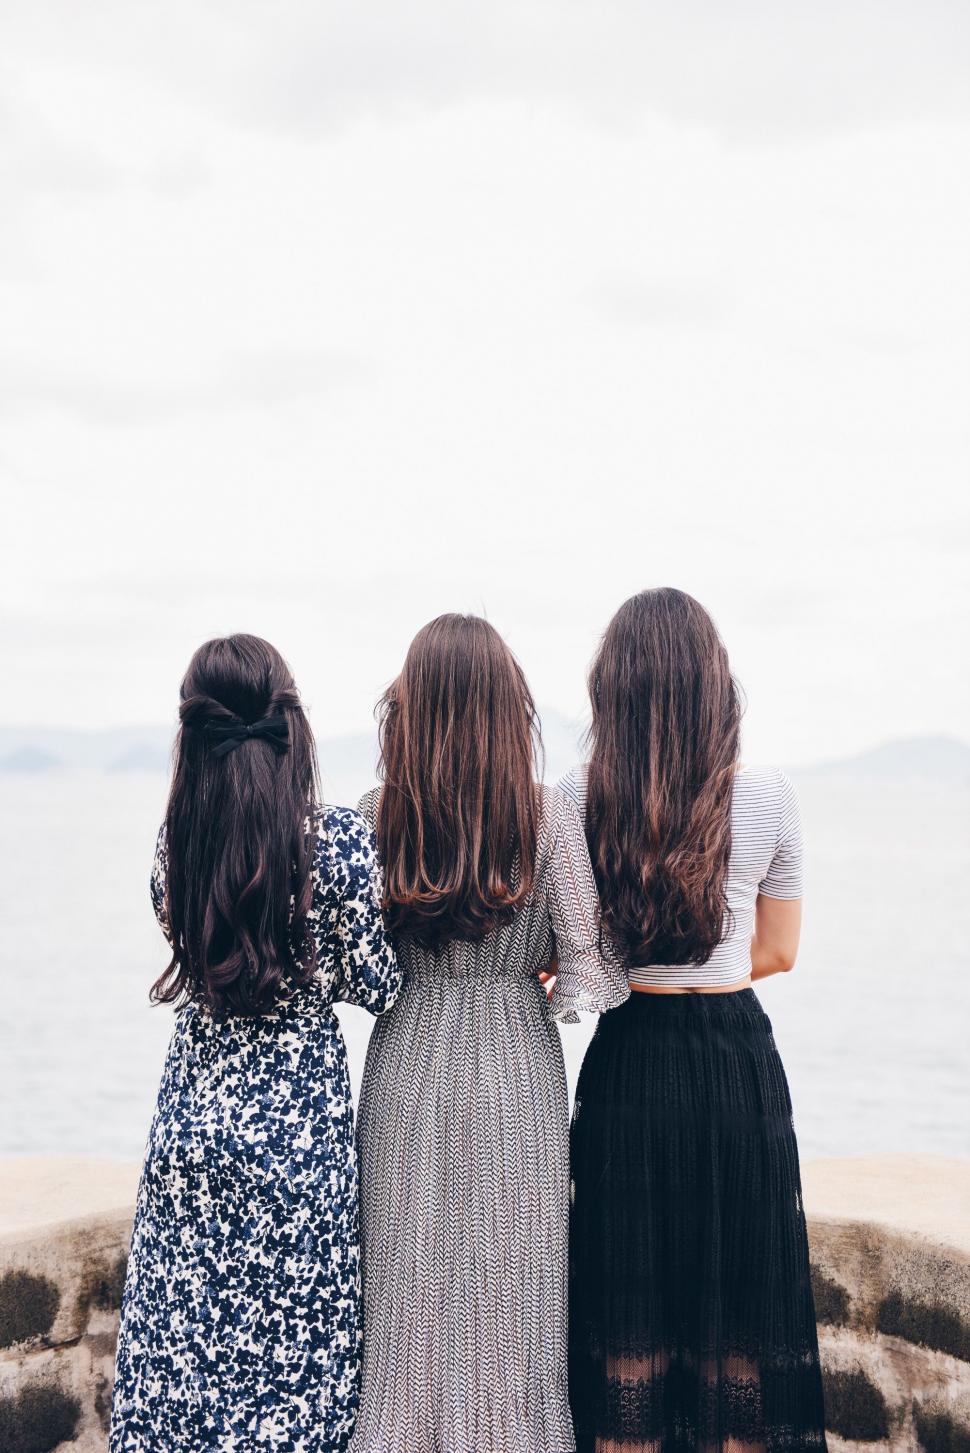 Free Image of Three Women Standing on a Beach Looking at the Water 